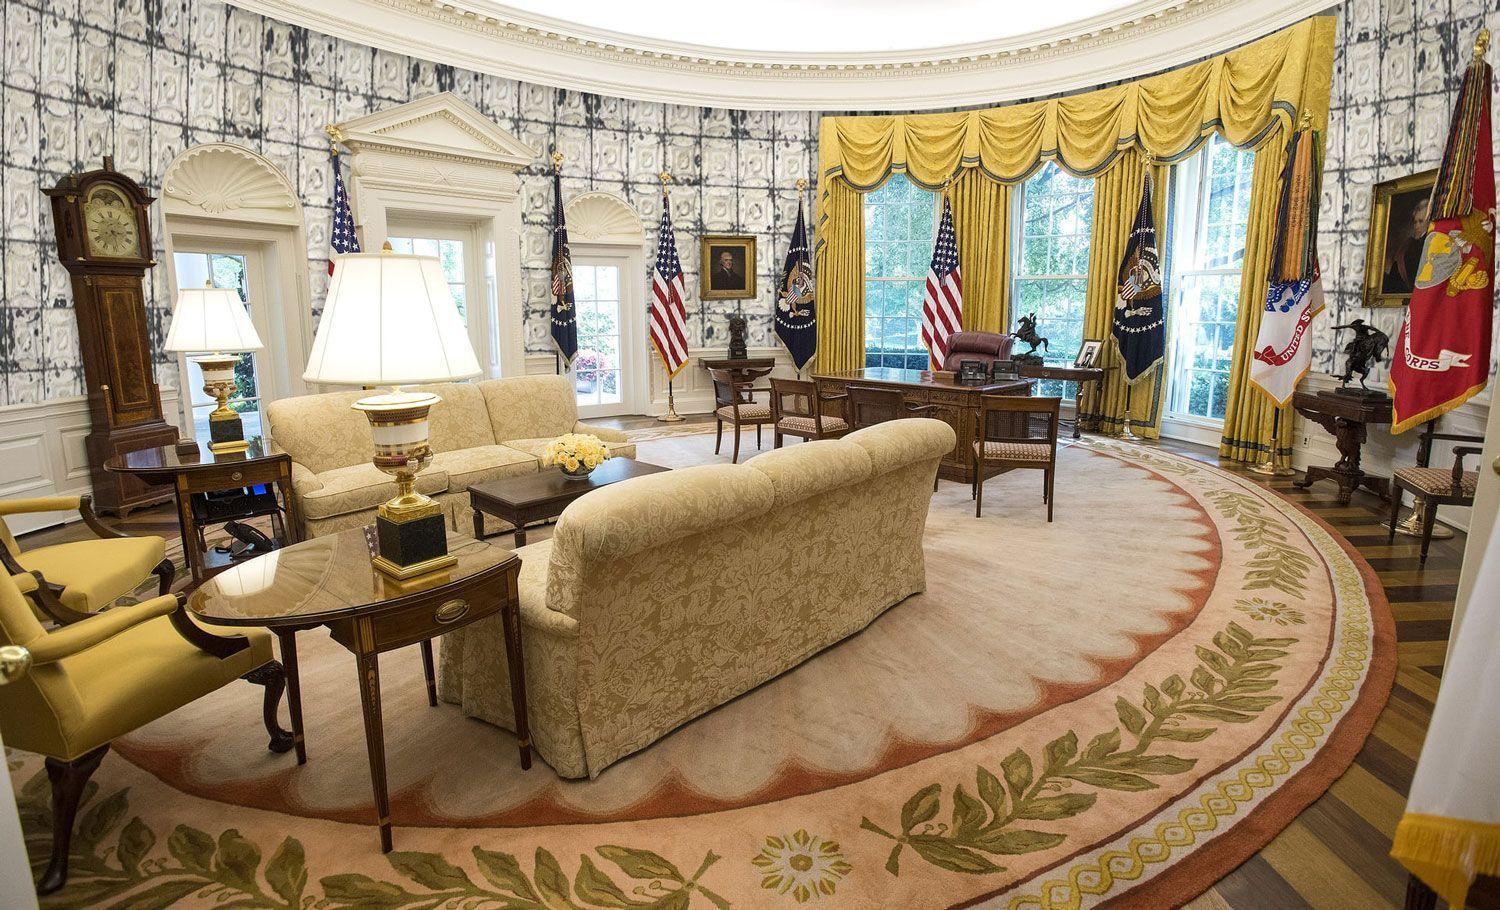 Photos: New look for White House’s West Wing after renovations - WTOP News